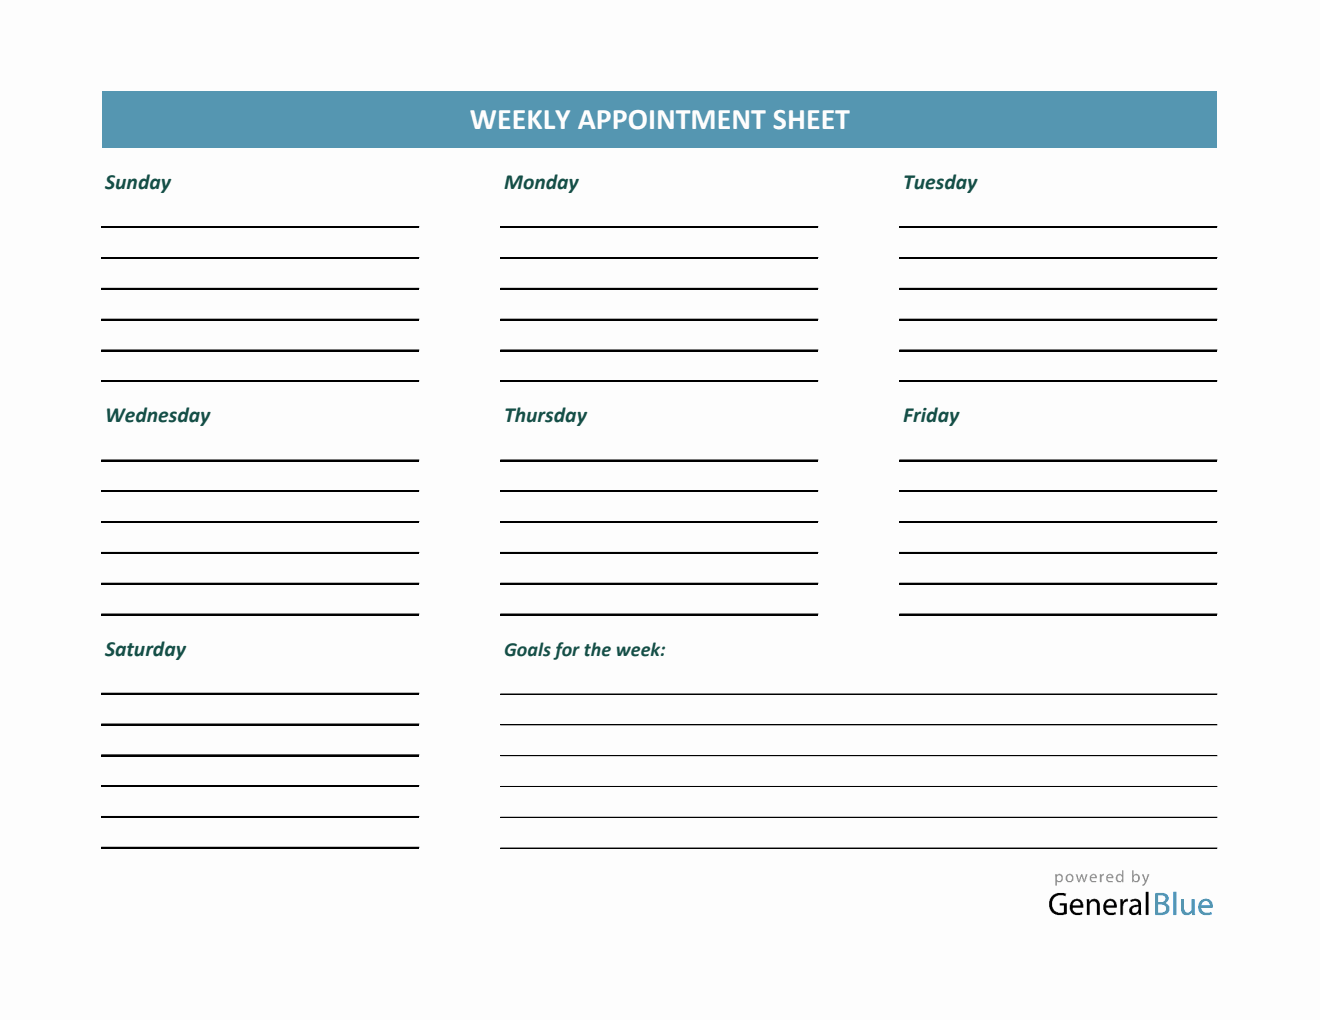 Weekly Appointment Sheet Template in PDF (Basic)